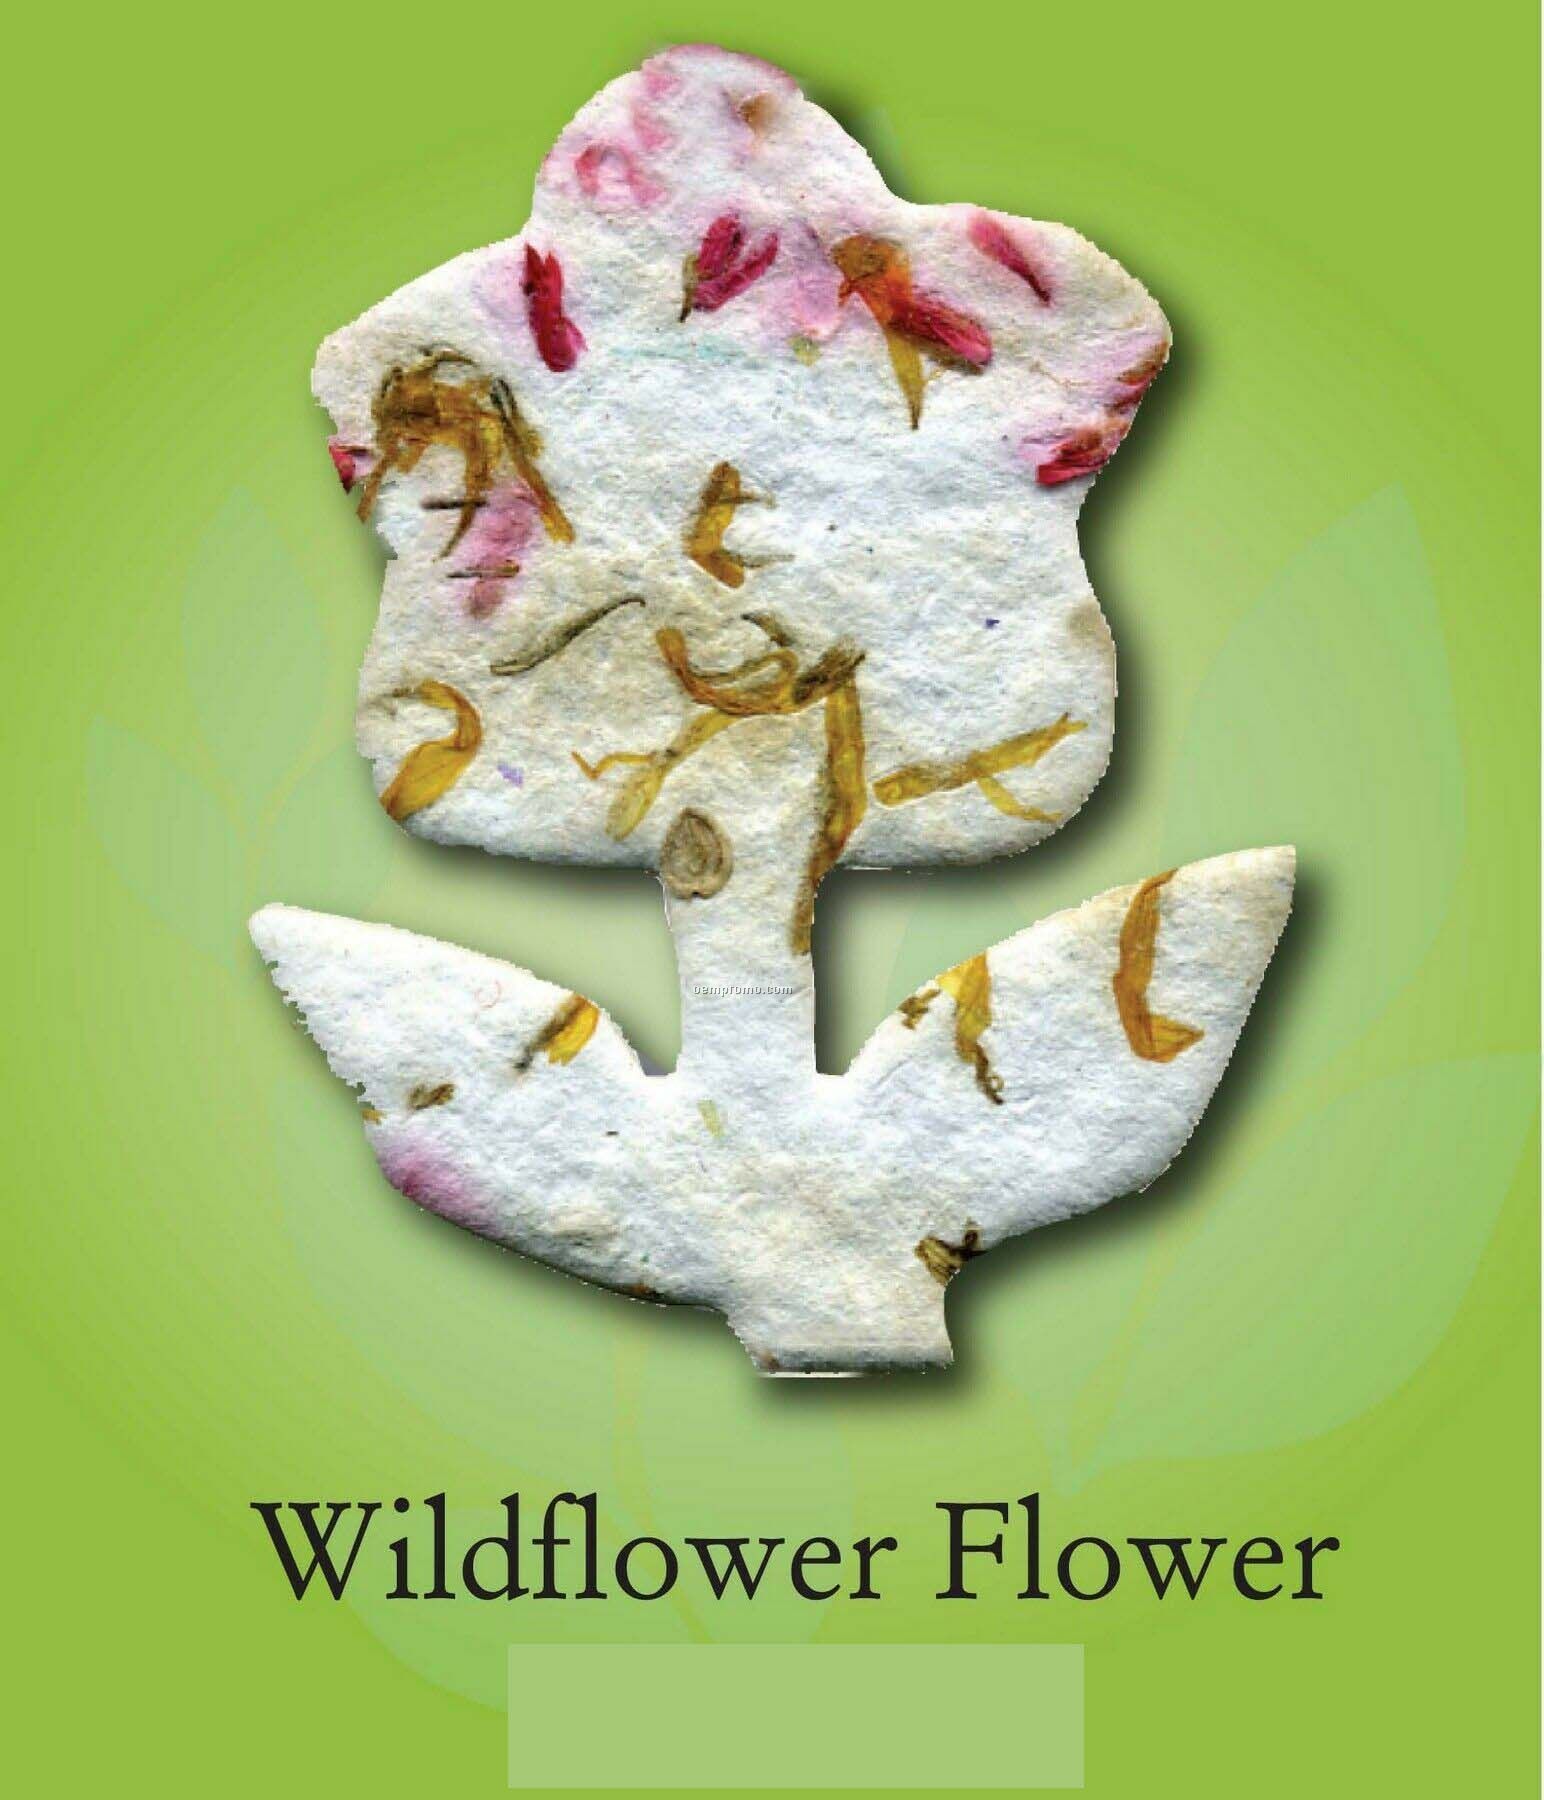 Wildflower Flower Ornament With Embedded Seed